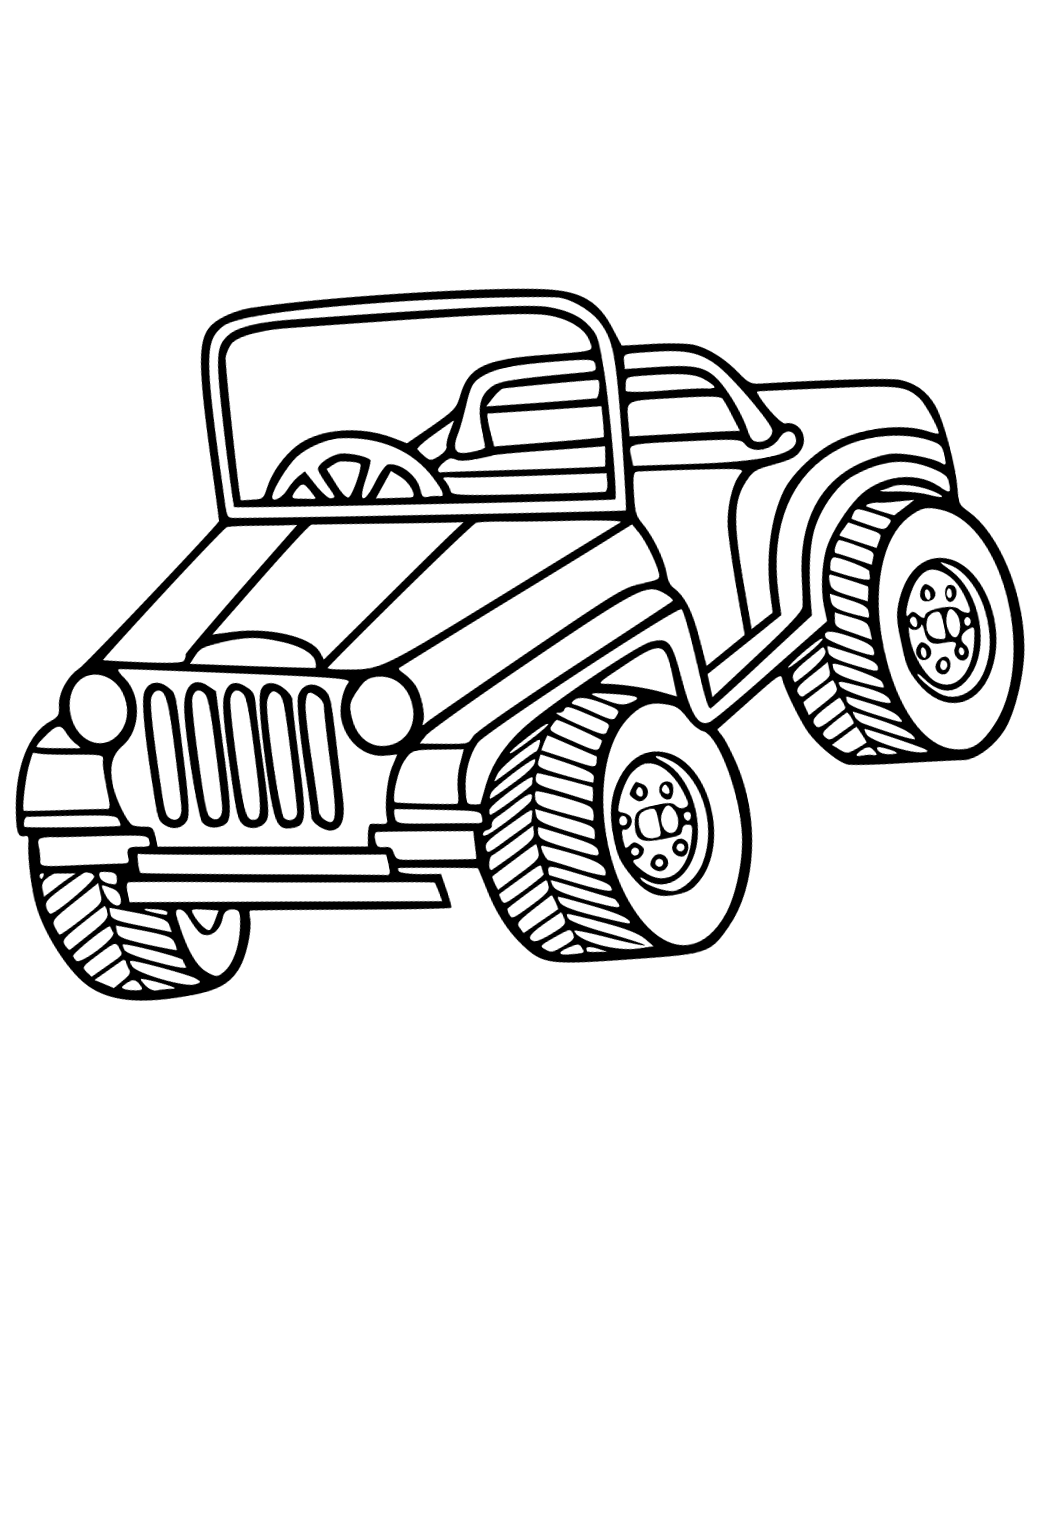 Free printable jeep cabriolet coloring page for adults and kids